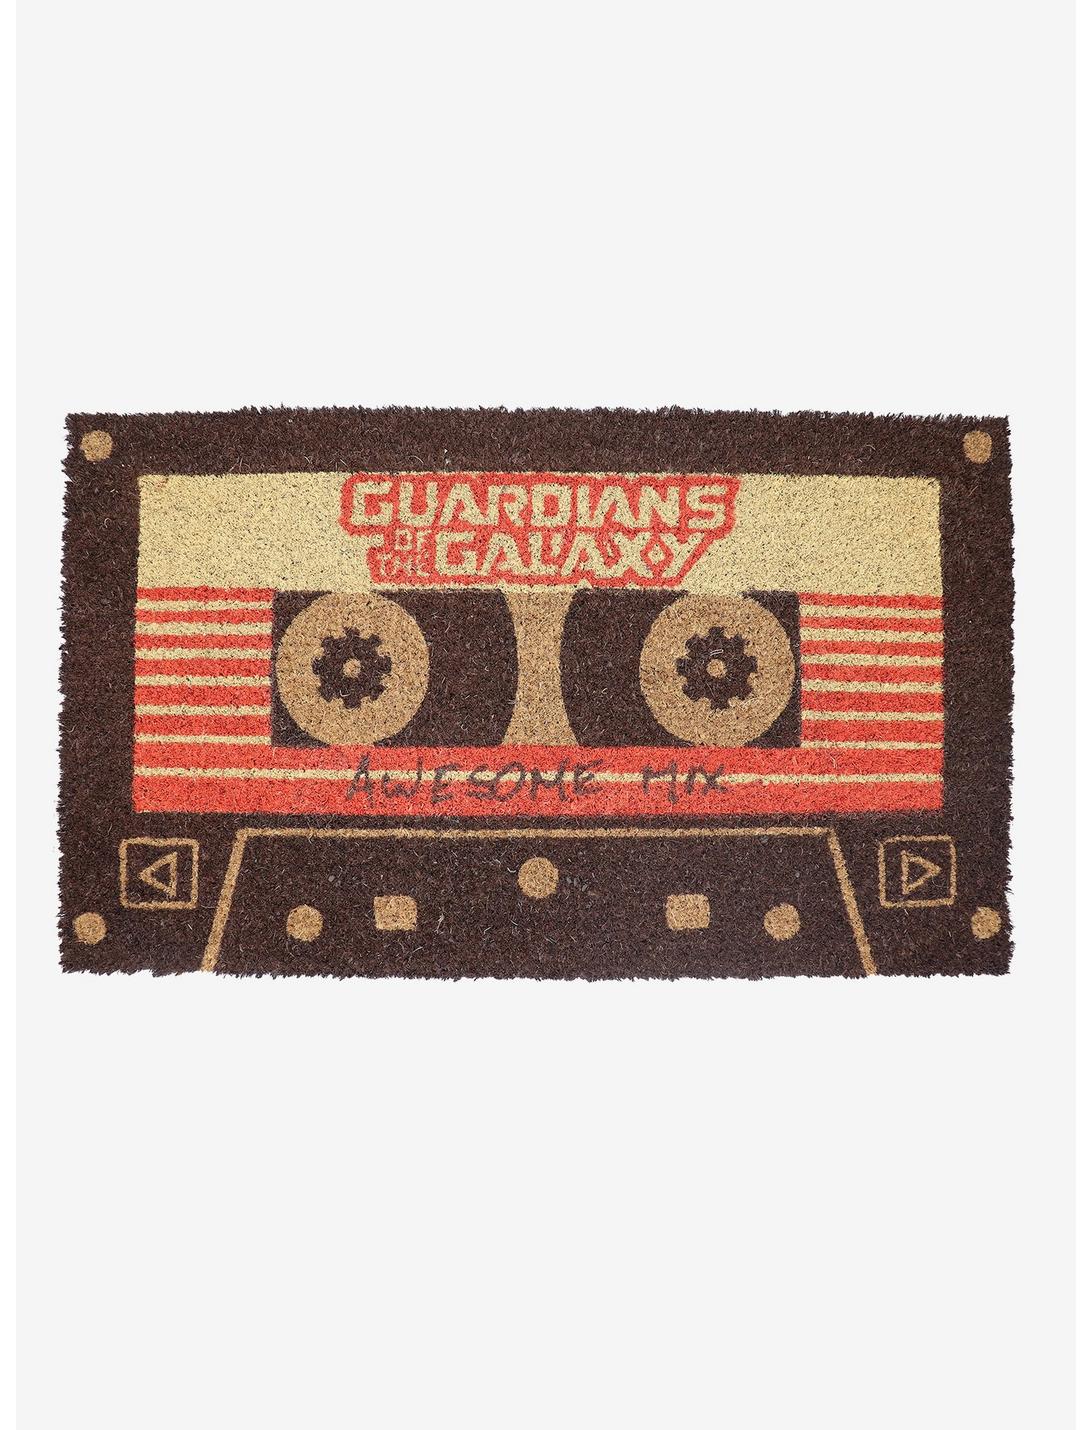 Marvel Guardians of the Galaxy Awesome Mix Cassette Doormat, , hi-res